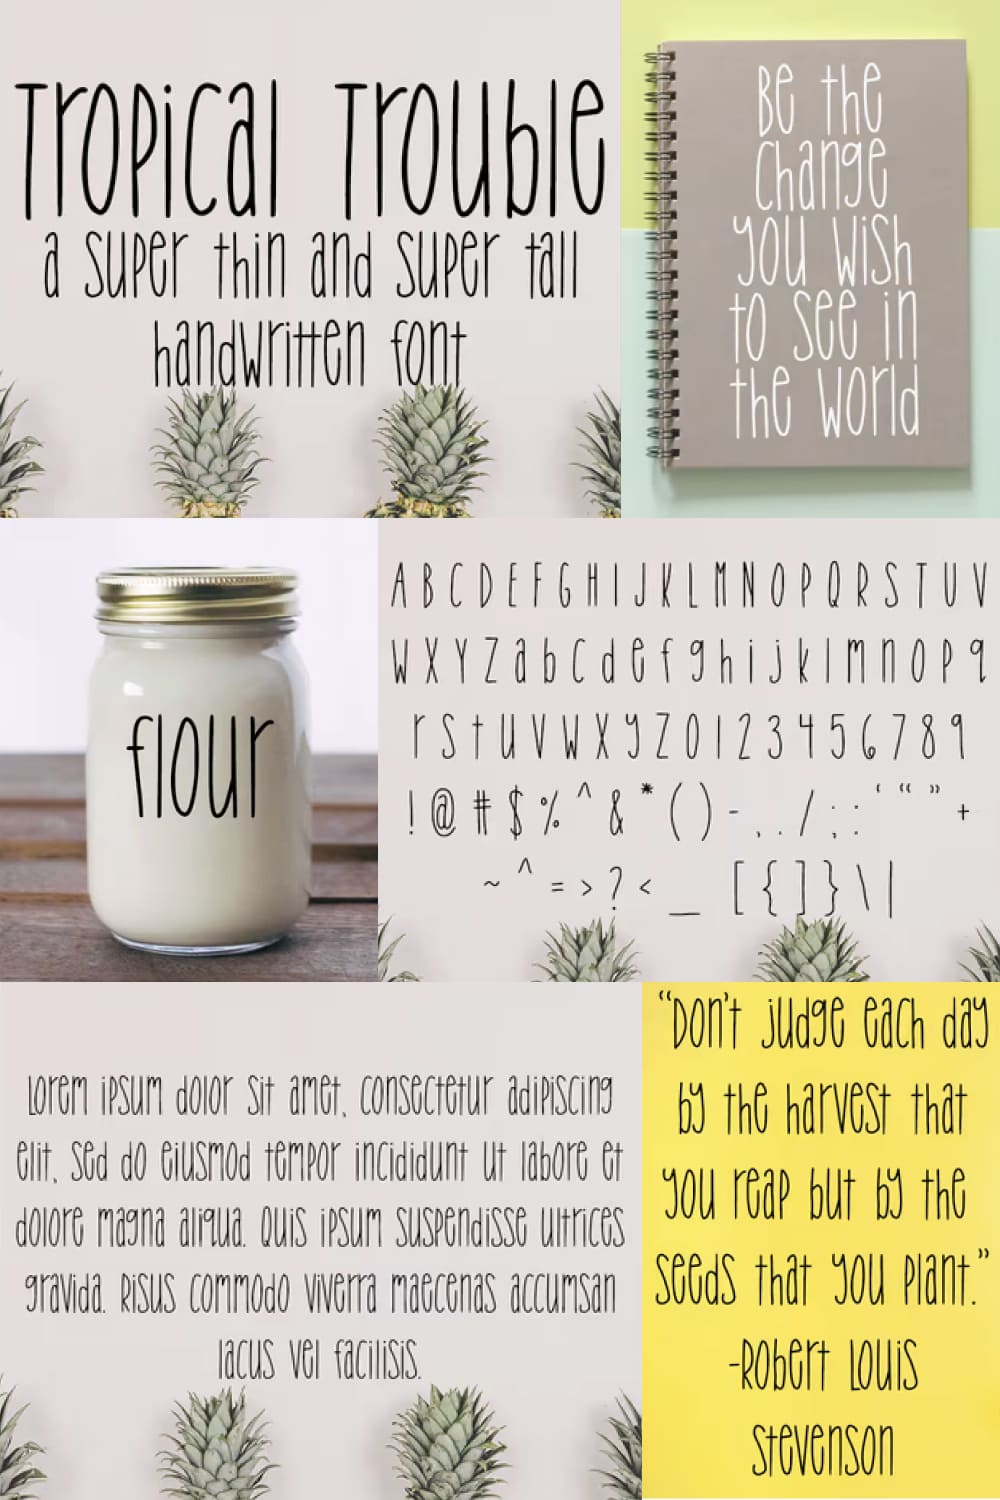 Tropical Trouble is a hand lettered sans-serif font. The super tall and super skinny font could be used for a variety of projects, such as labels for a jar or a name on a tumbler.